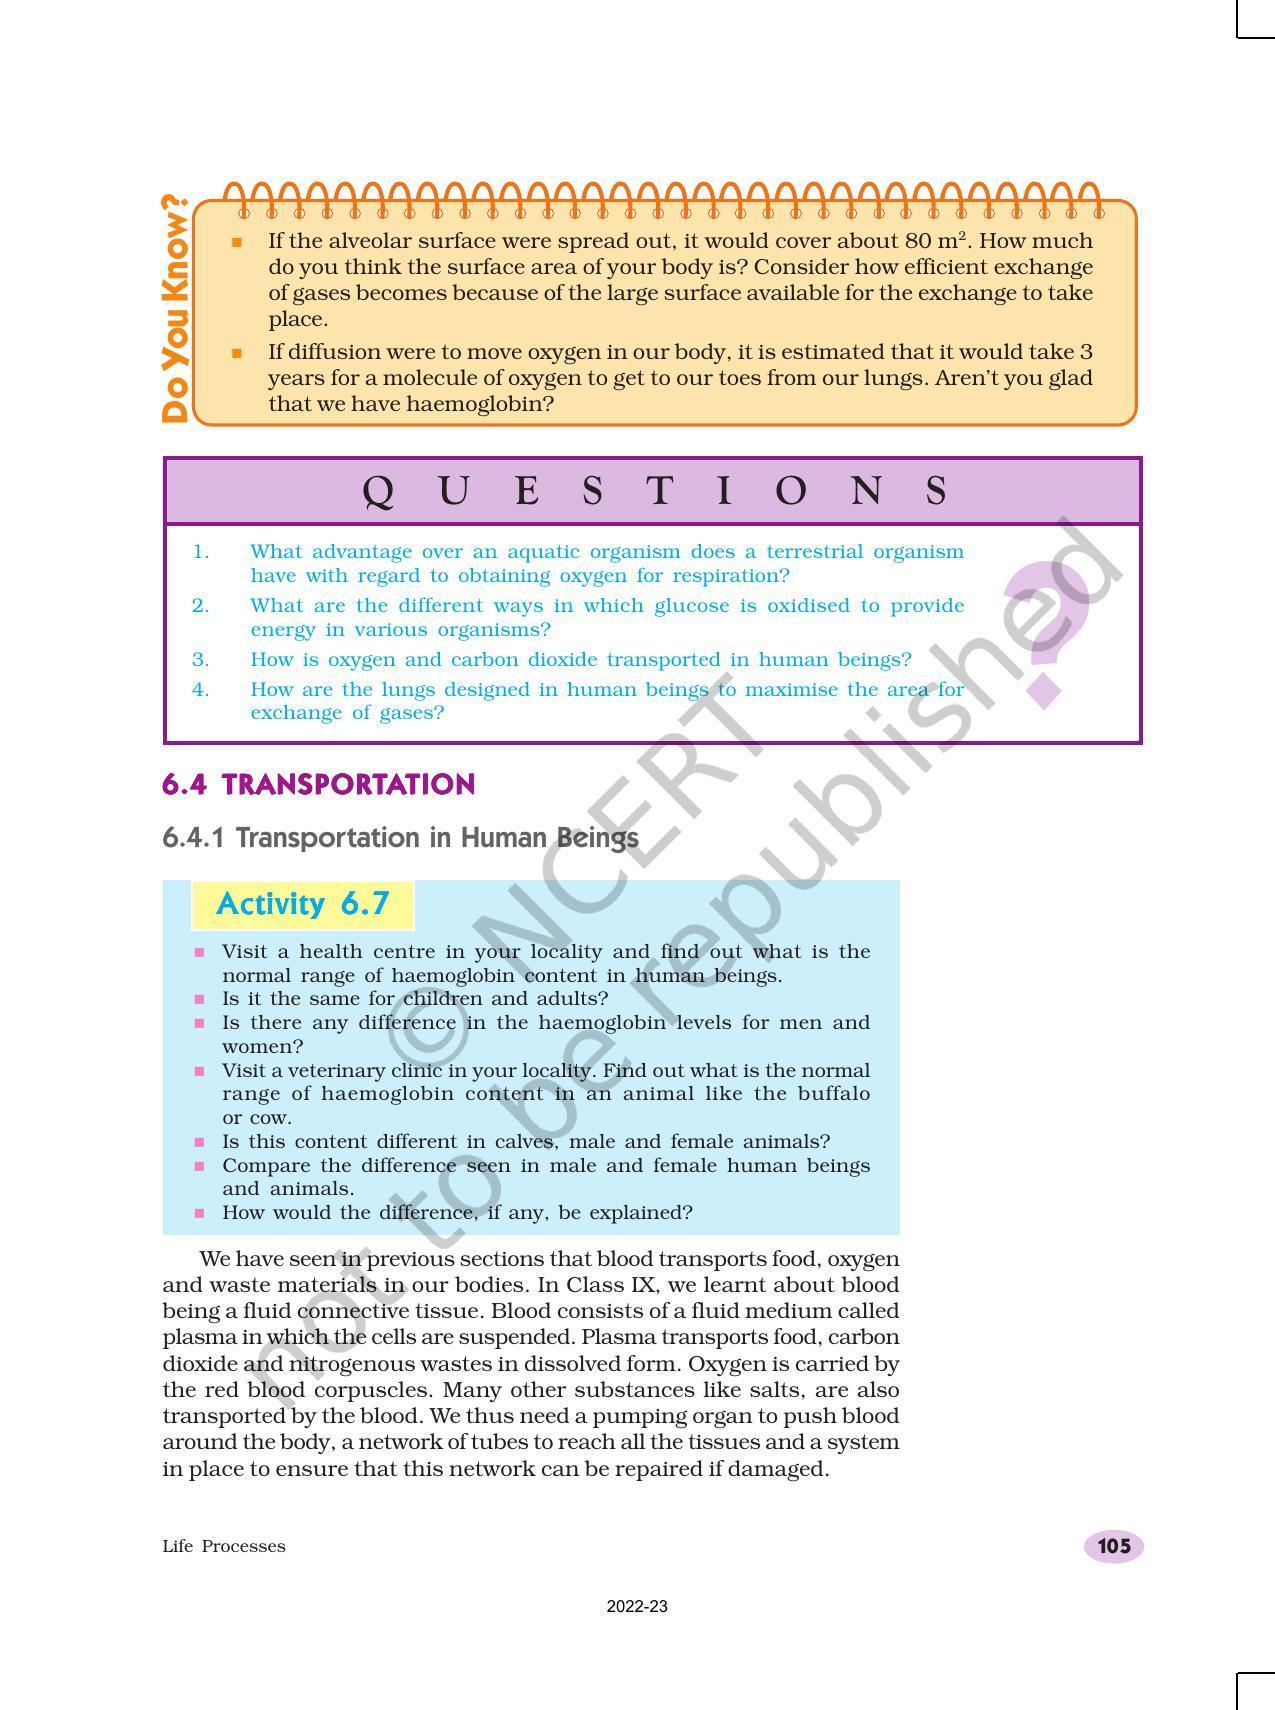 NCERT Book for Class 10 Science Chapter 6 Life Processes - Page 13